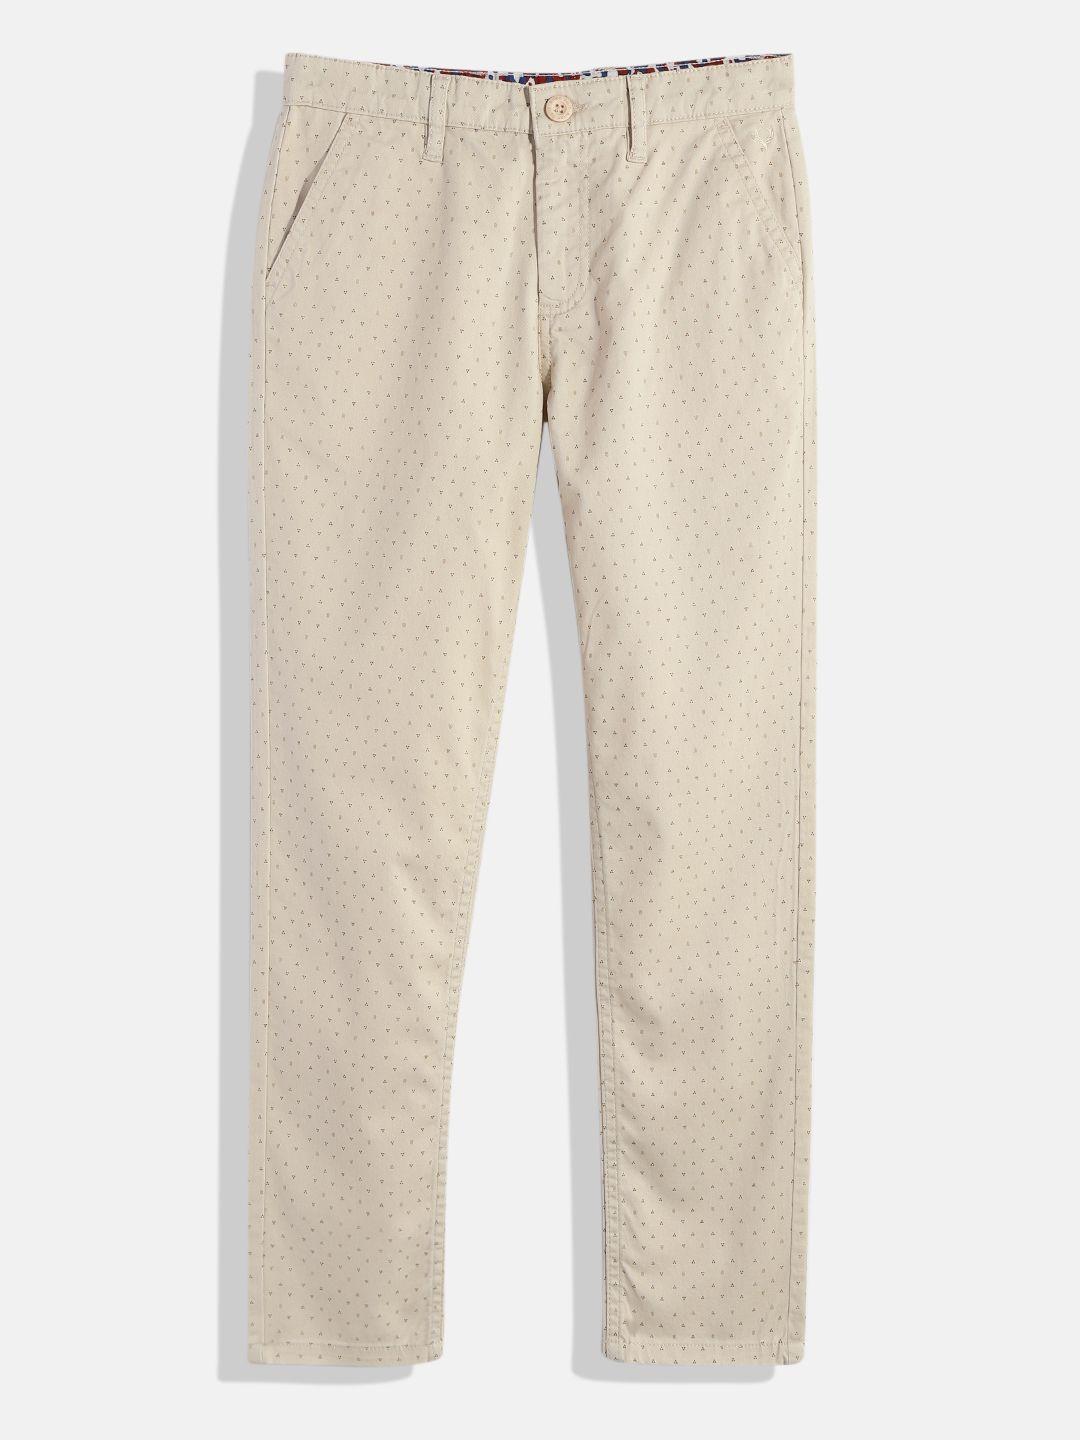 allen solly junior boys beige typography printed trousers